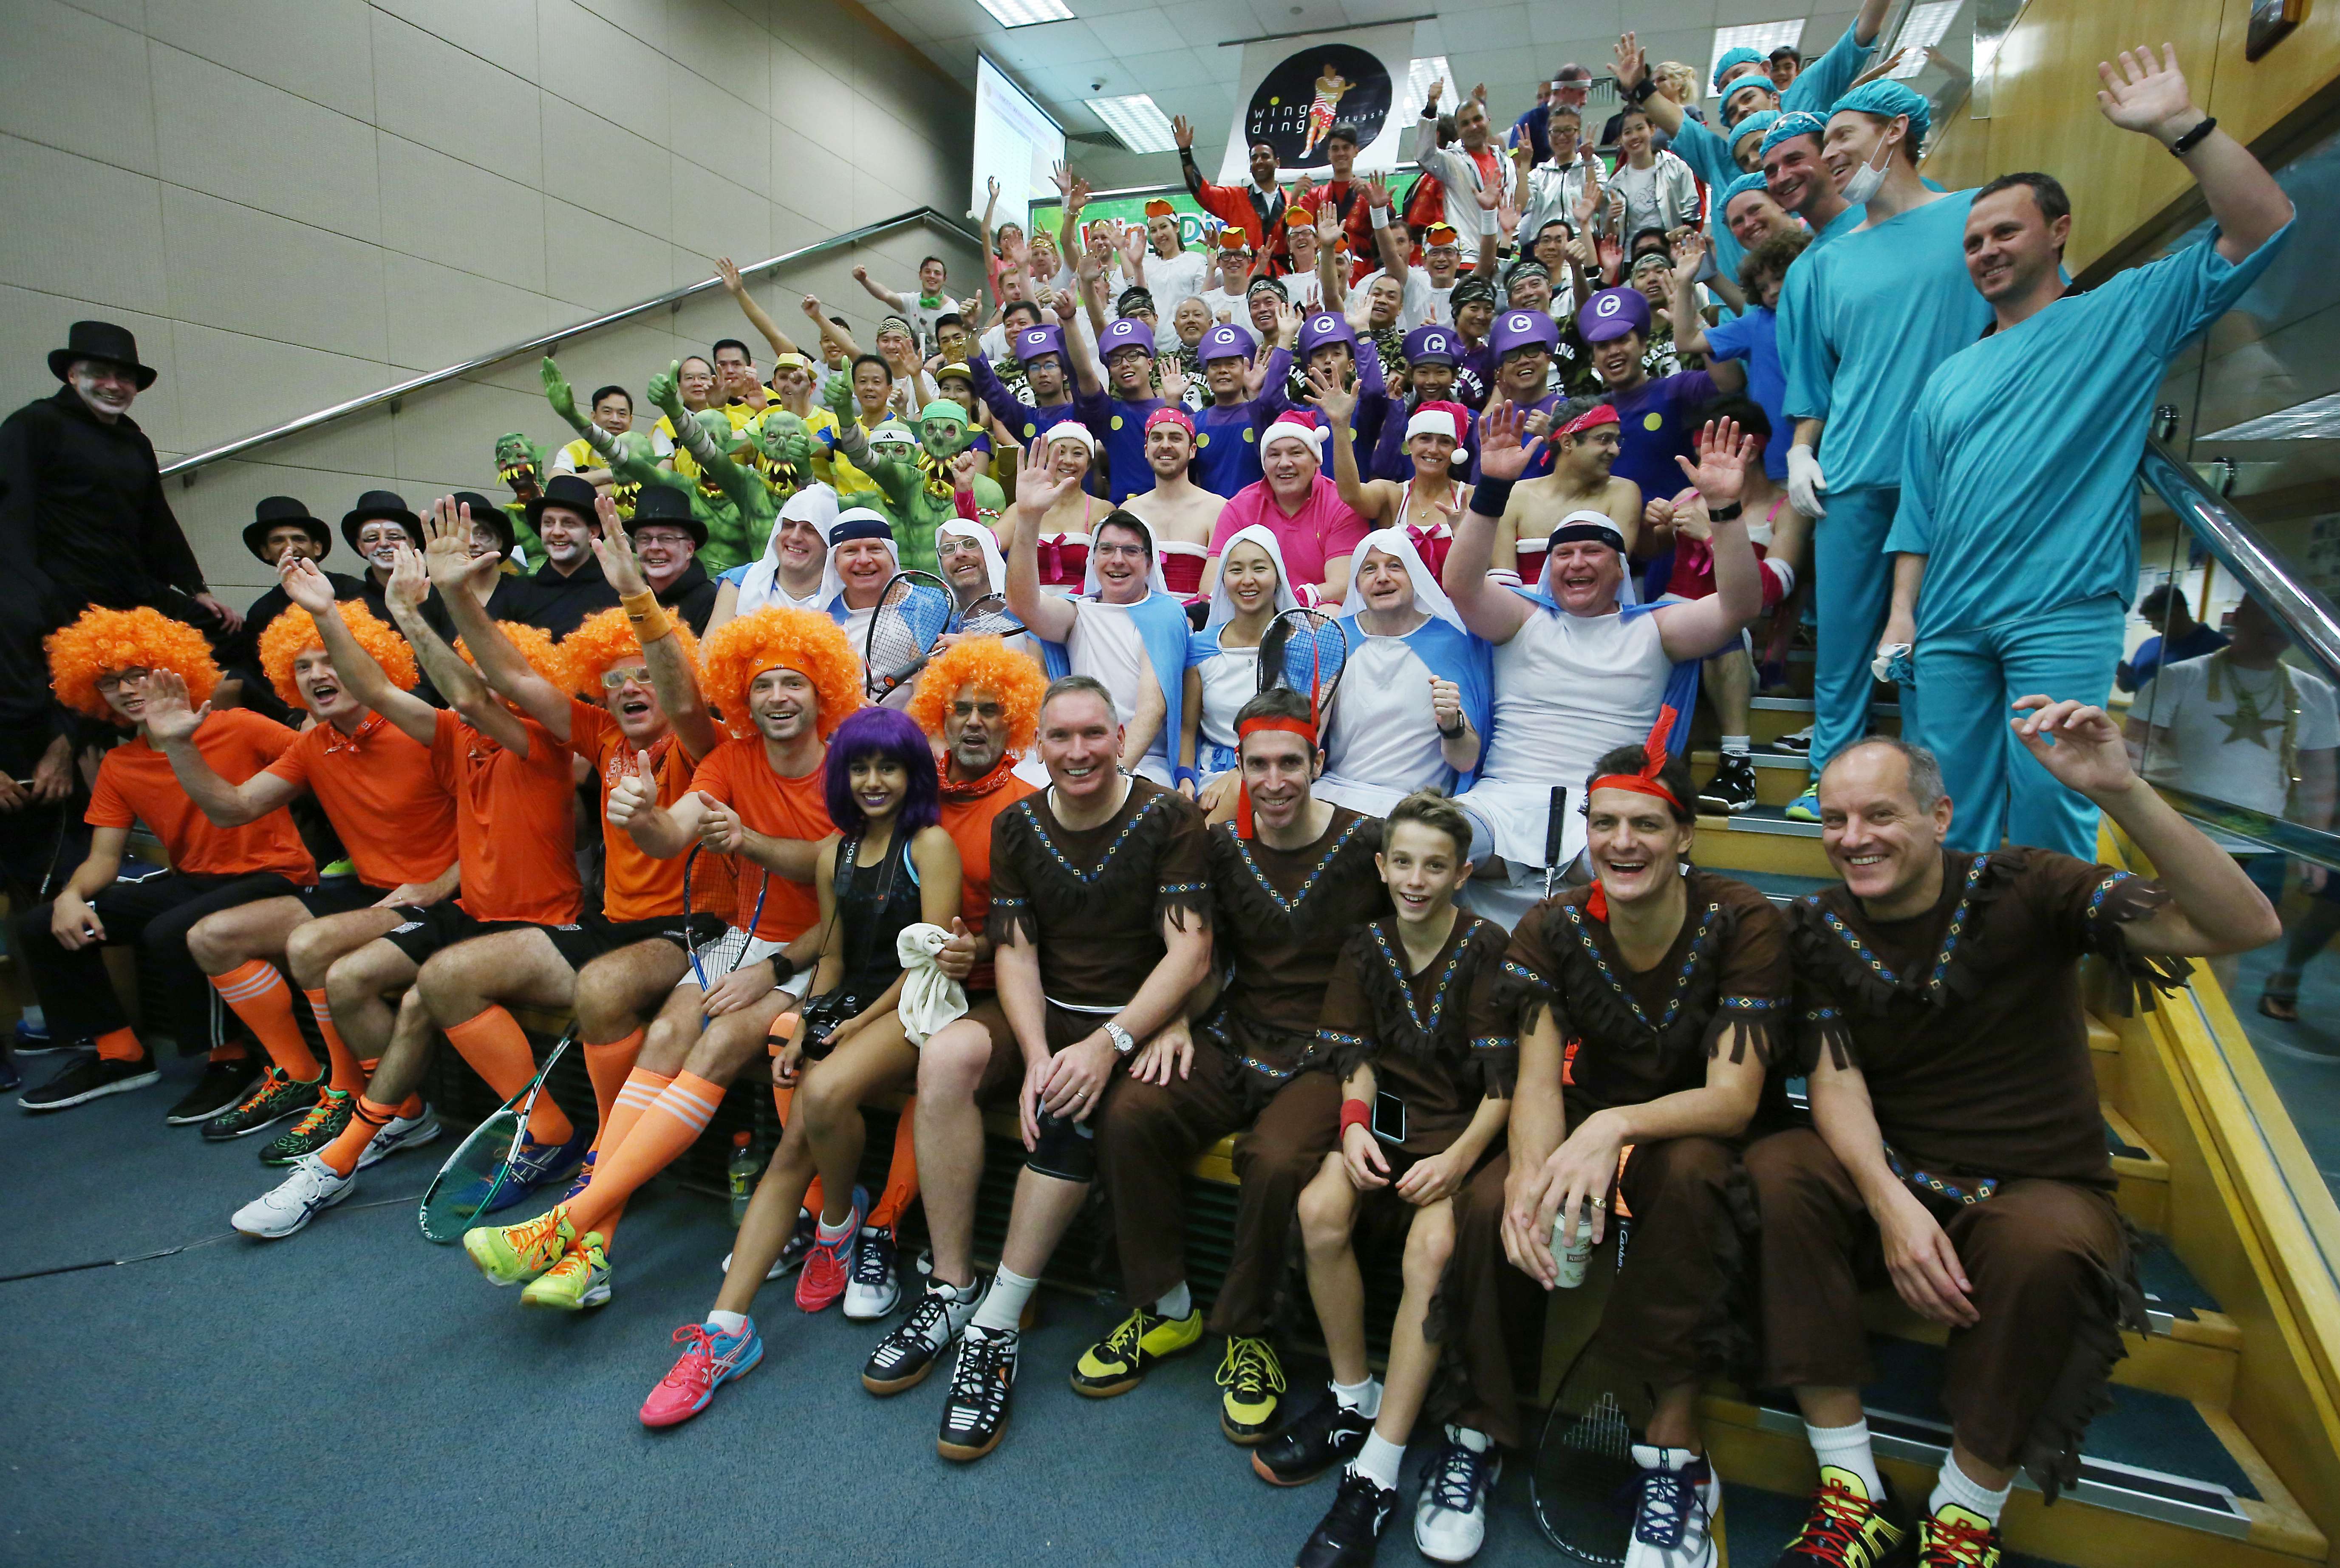 Participants in the Wing Ding squash tournament at Hong Kong Football Club. Photo: Edmond So